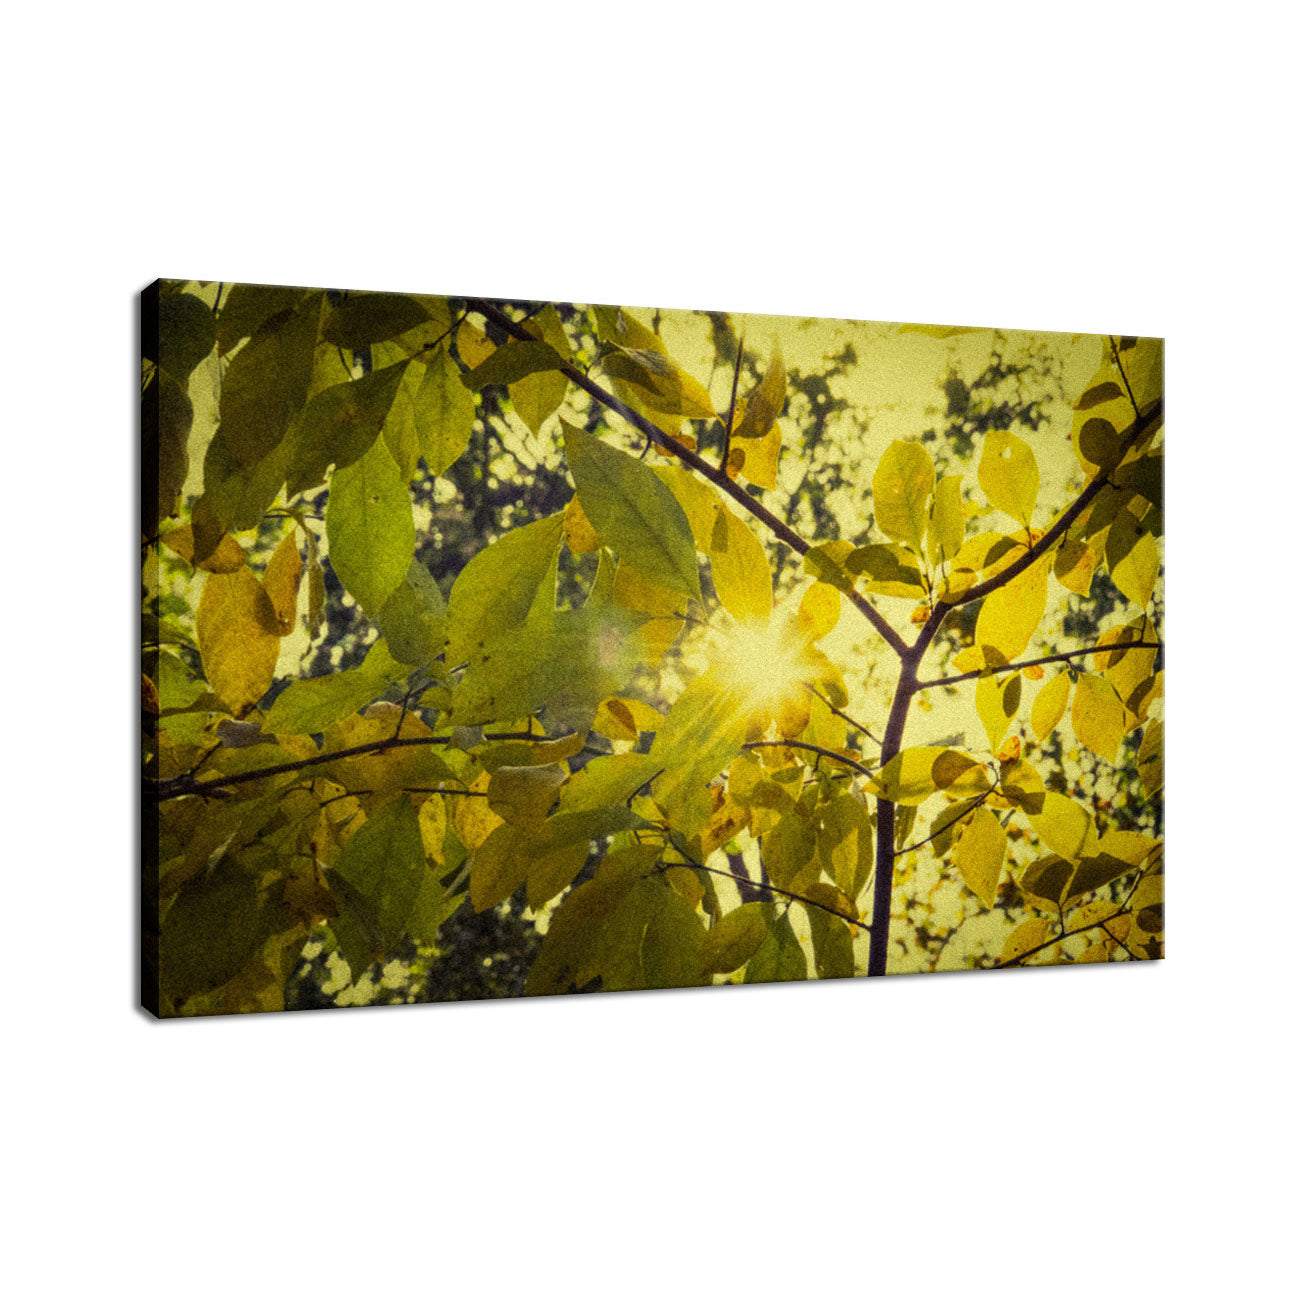 Leaf Print On Canvas: Aged Golden Leaves Botanical / Nature Photo Fine Art Canvas Wall Art Prints  - PIPAFINEART